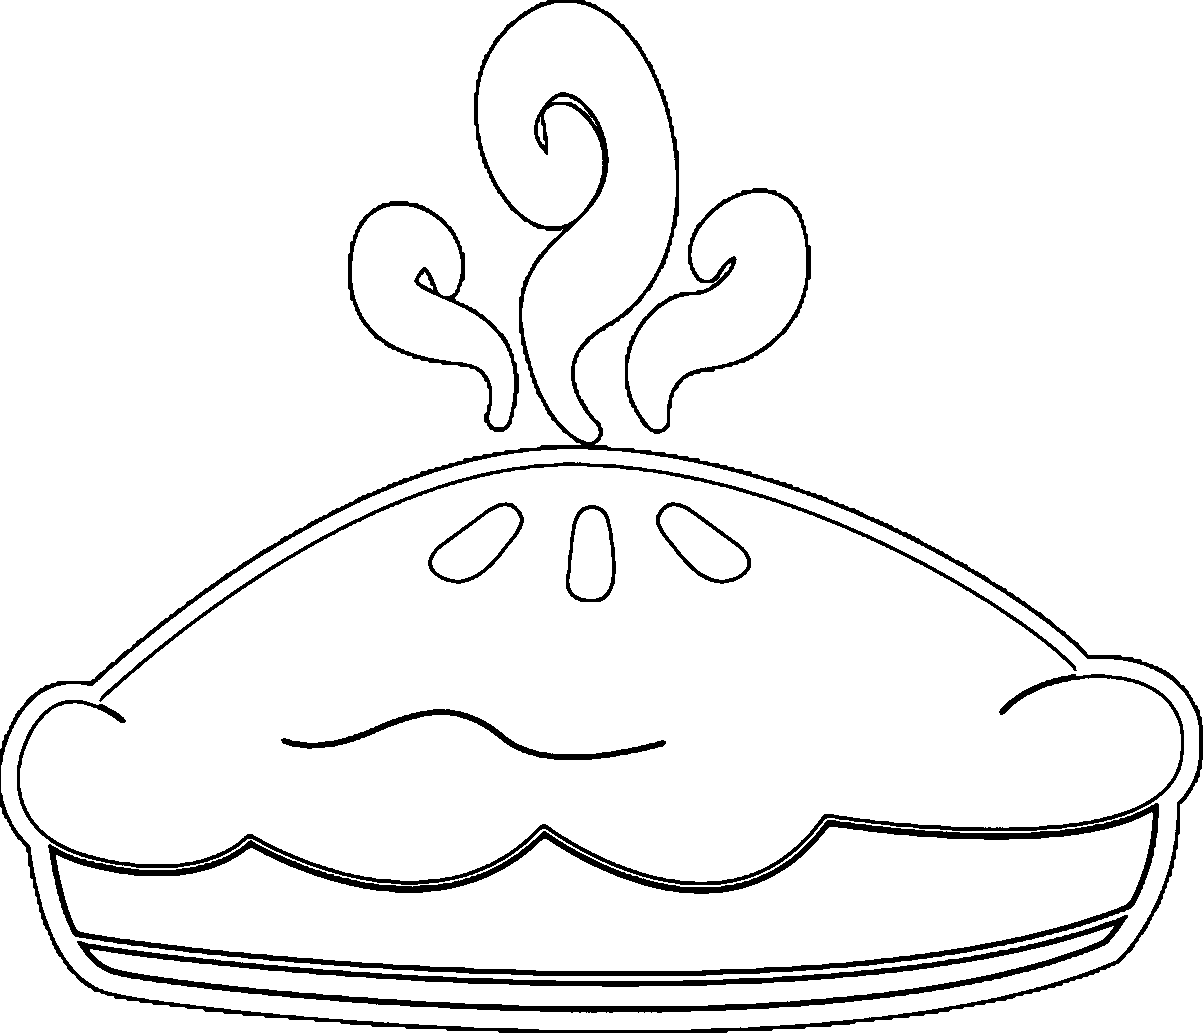 Apple Pie Coloring Page | Wecoloringpage